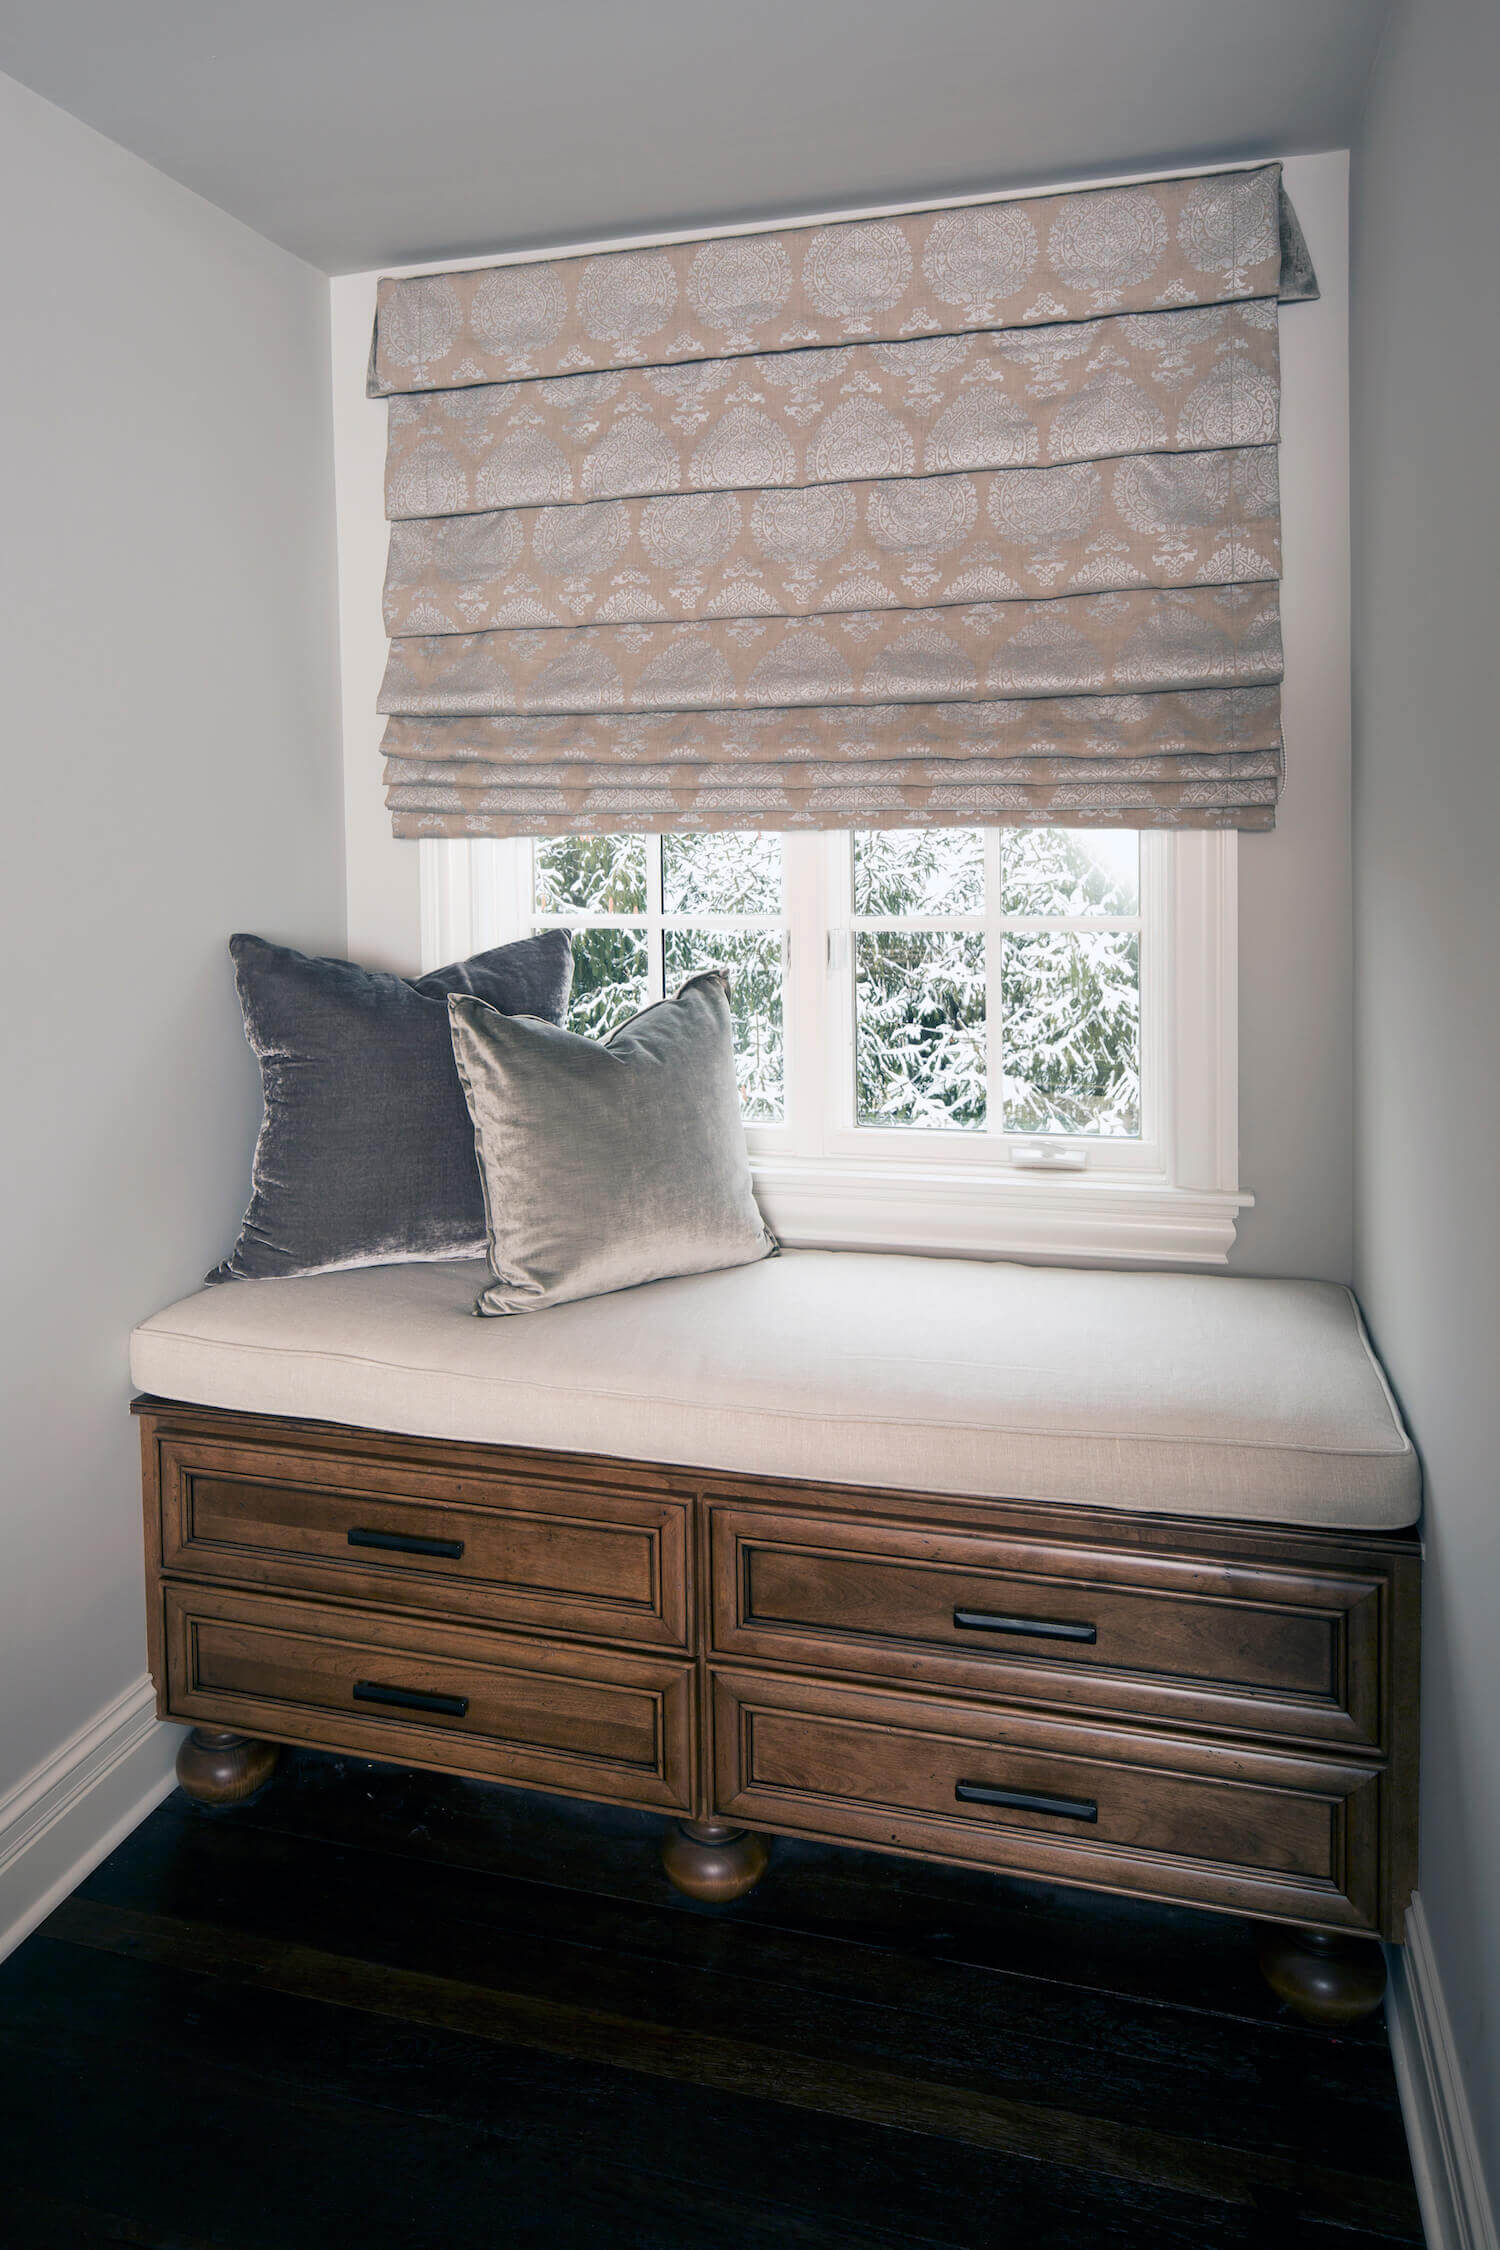 Window Treatment Tips for New Homeowners: Focus on Privacy First